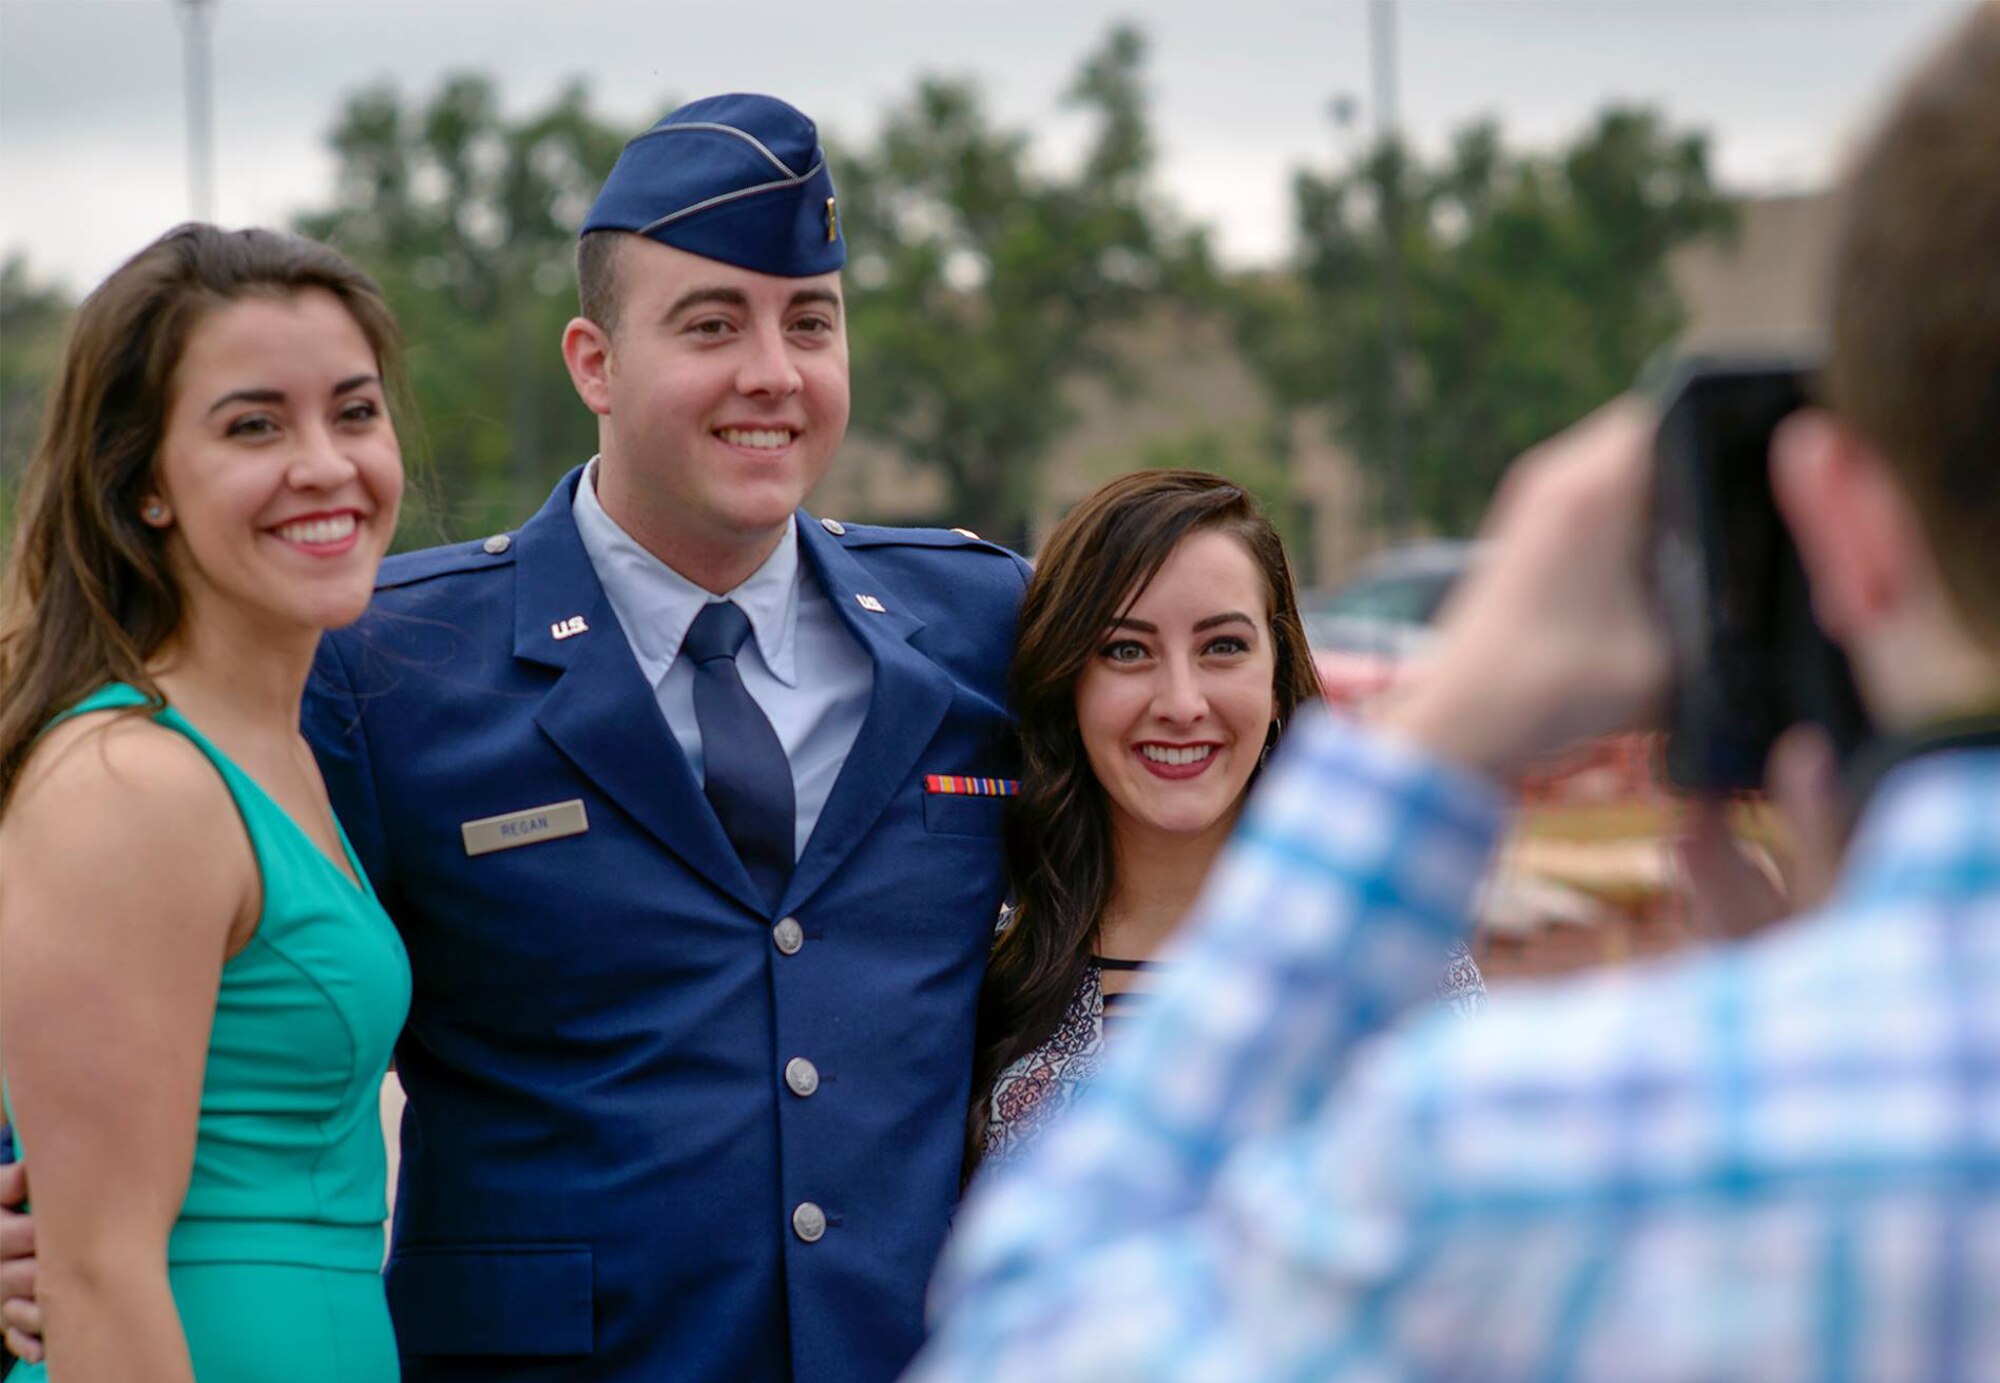 From left, Grace Regan, 2nd Lt. Patrick Regan and Clare Regan pose for a photo following Specialized Undergraduate Pilot Training Class 16-09's graduation at Vance Air Force Base, Oklahoma, May 20. Lieutenant Regan was one of 15 student pilots to receive their silver wings during the ceremony. (U.S. Air Force photo by David Poe)